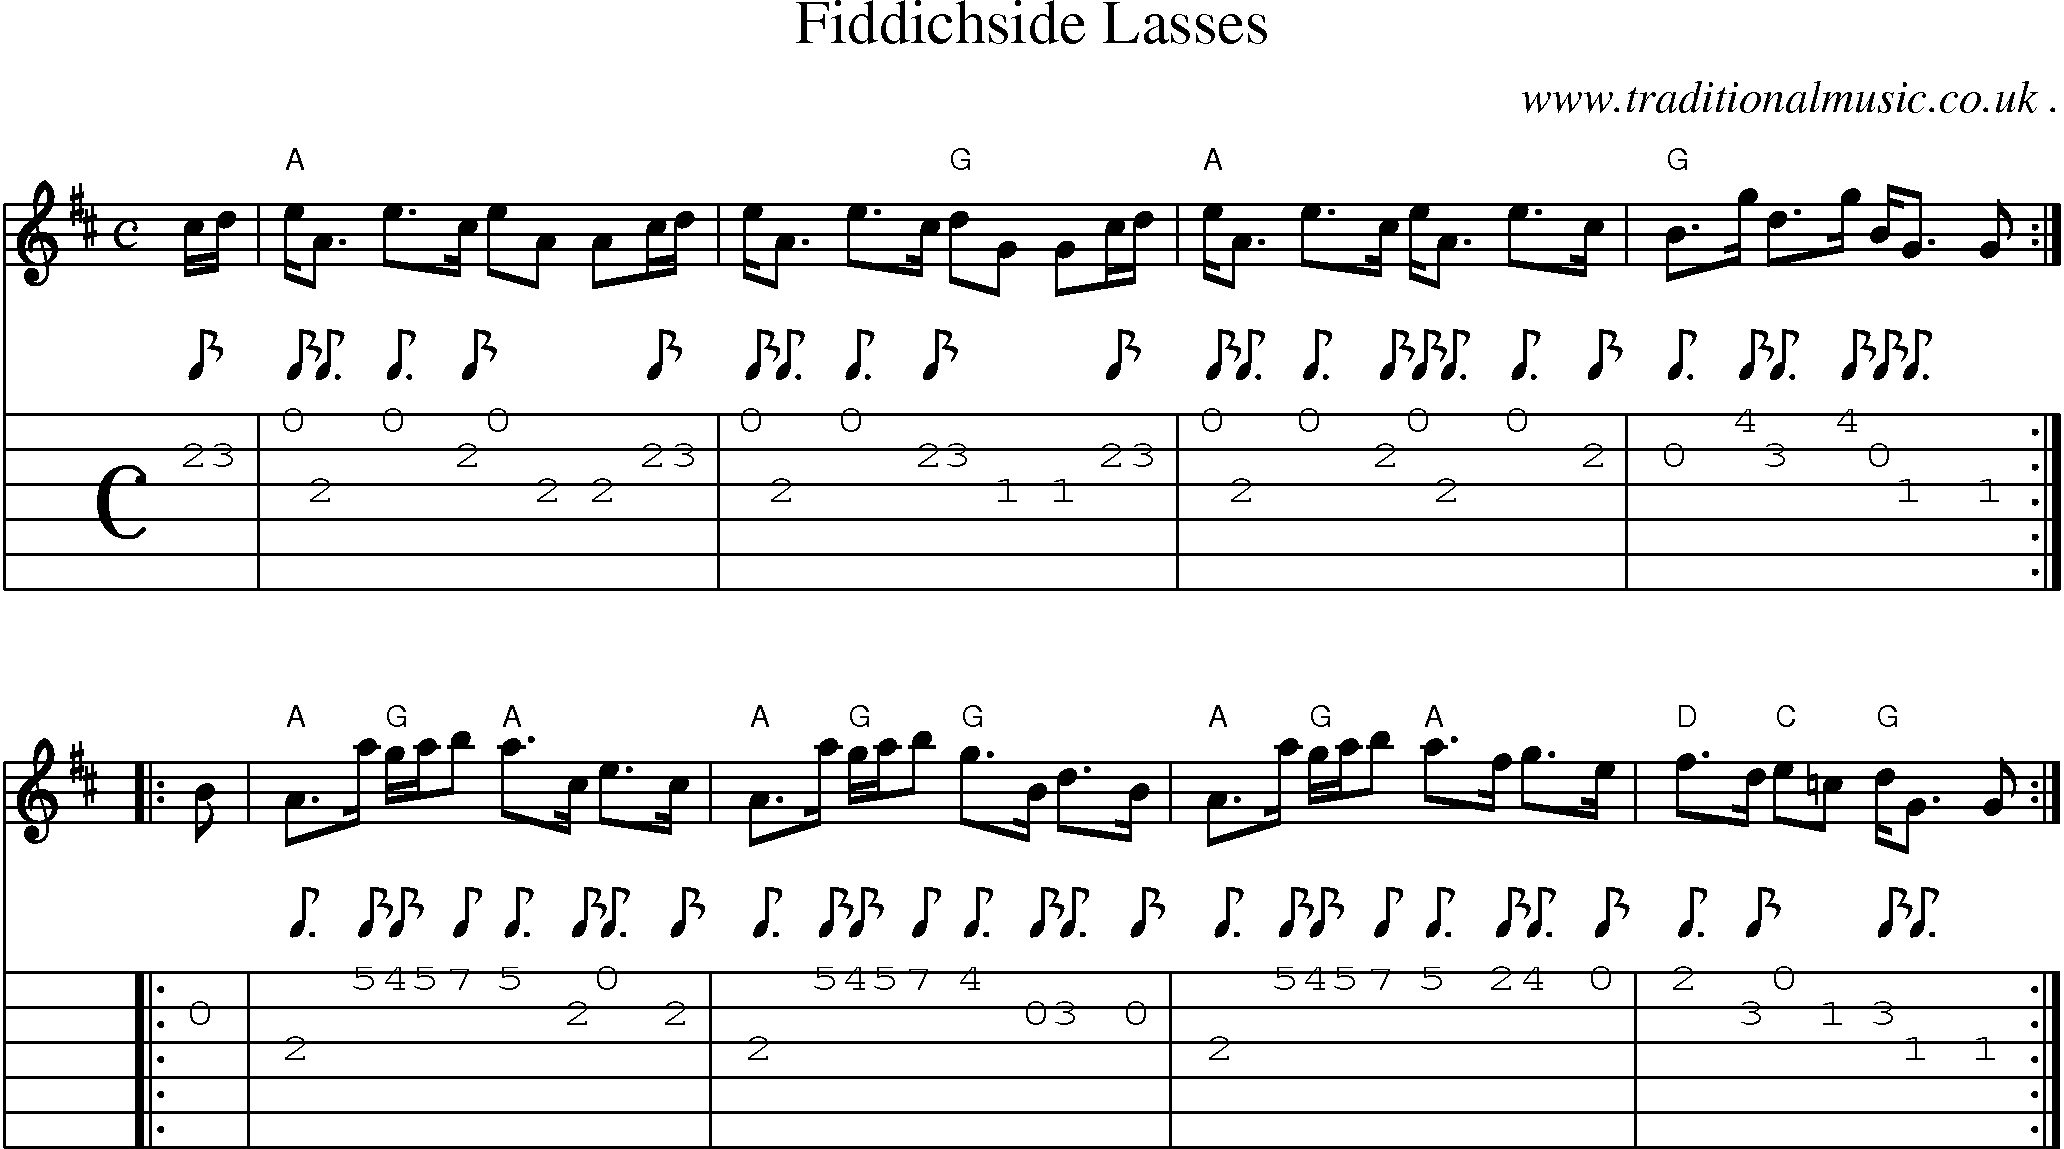 Sheet-music  score, Chords and Guitar Tabs for Fiddichside Lasses